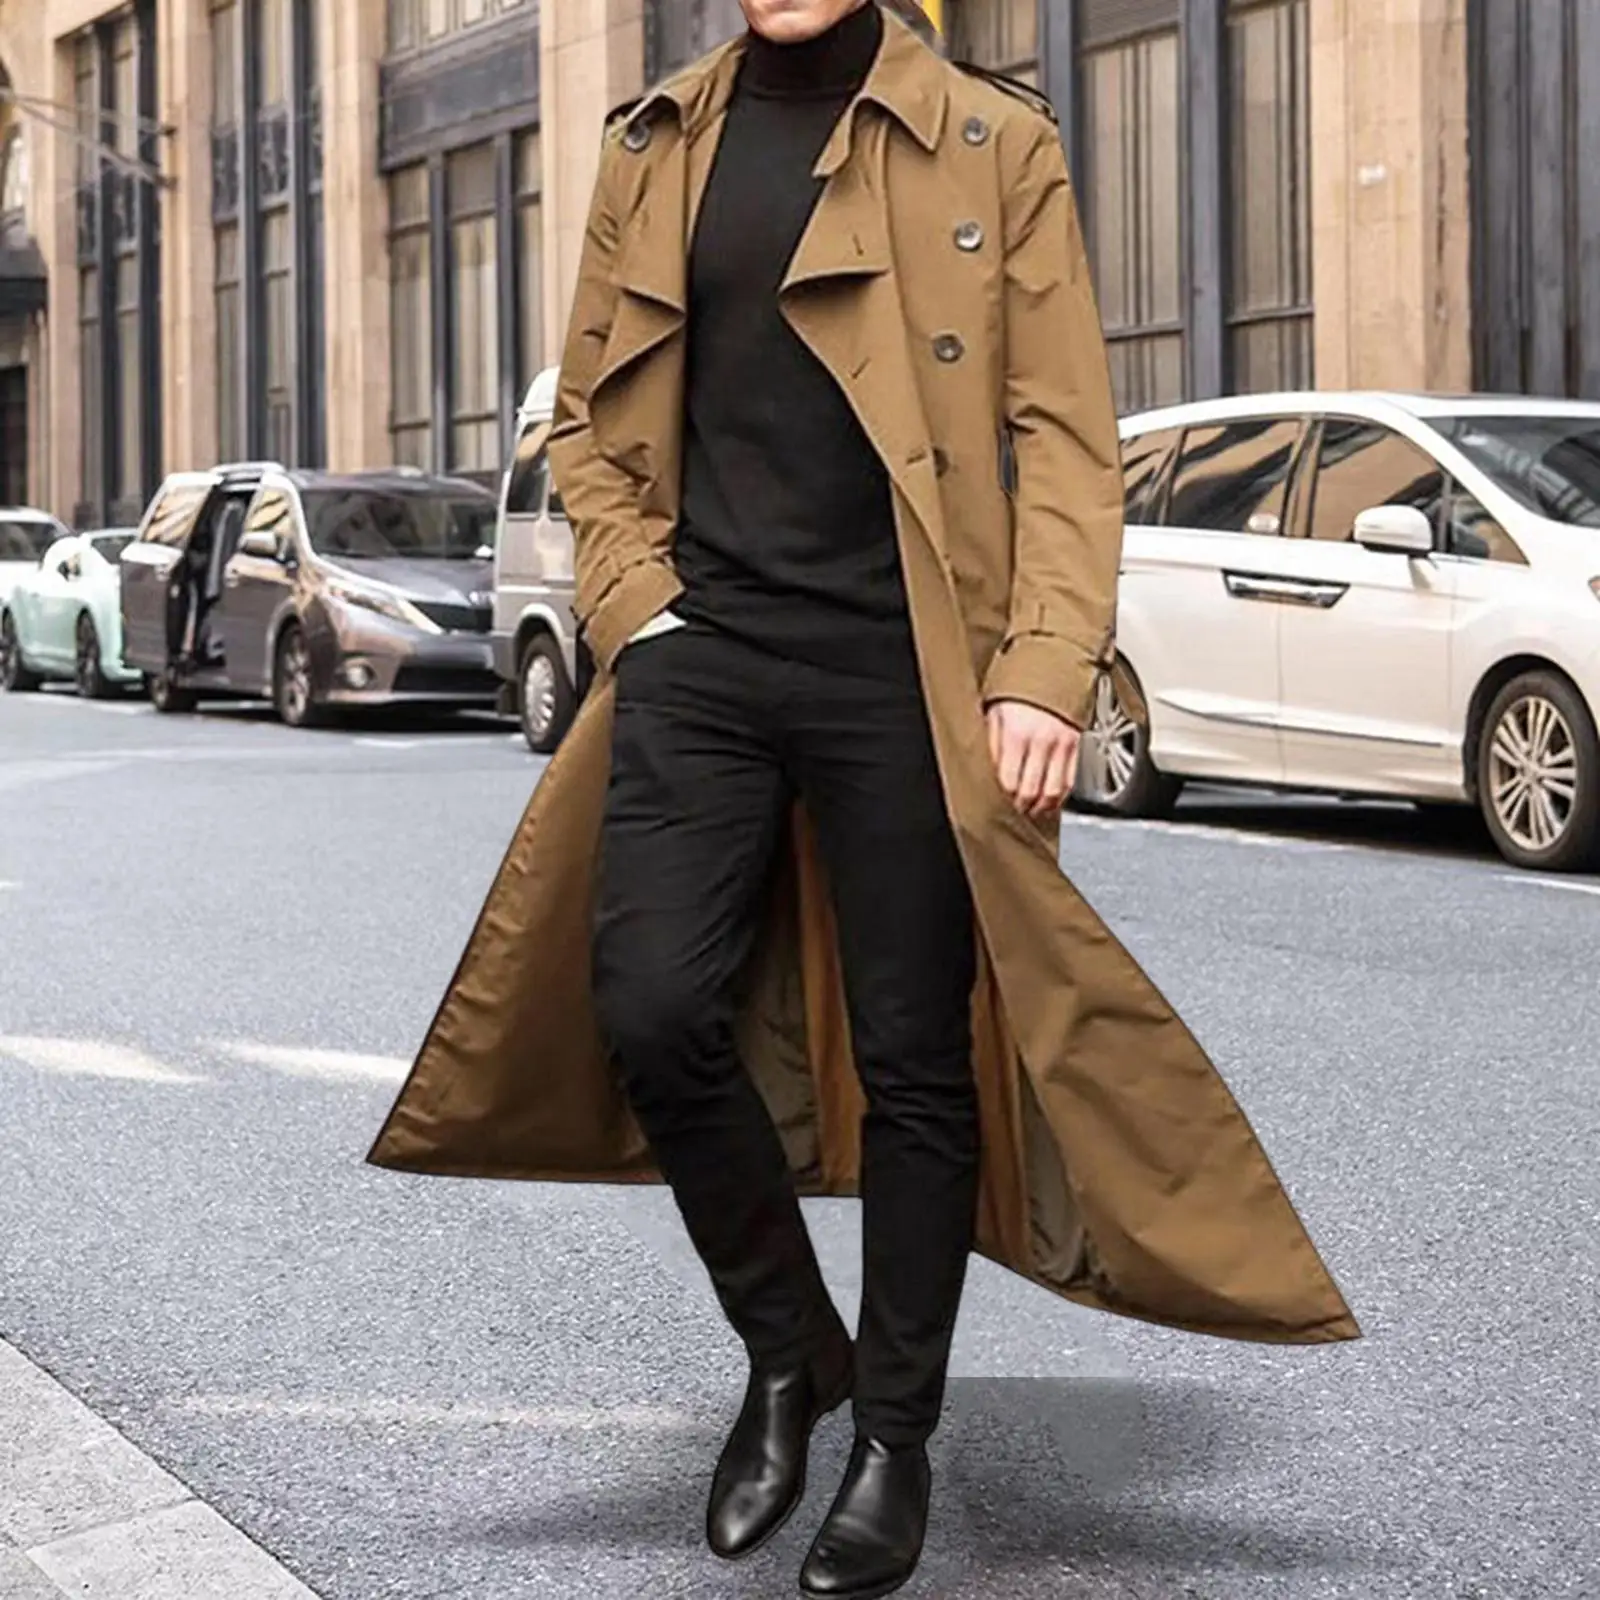 Belted Men`trench Coat Slim Fit Notched Lapel Long Jacket Classic for Work